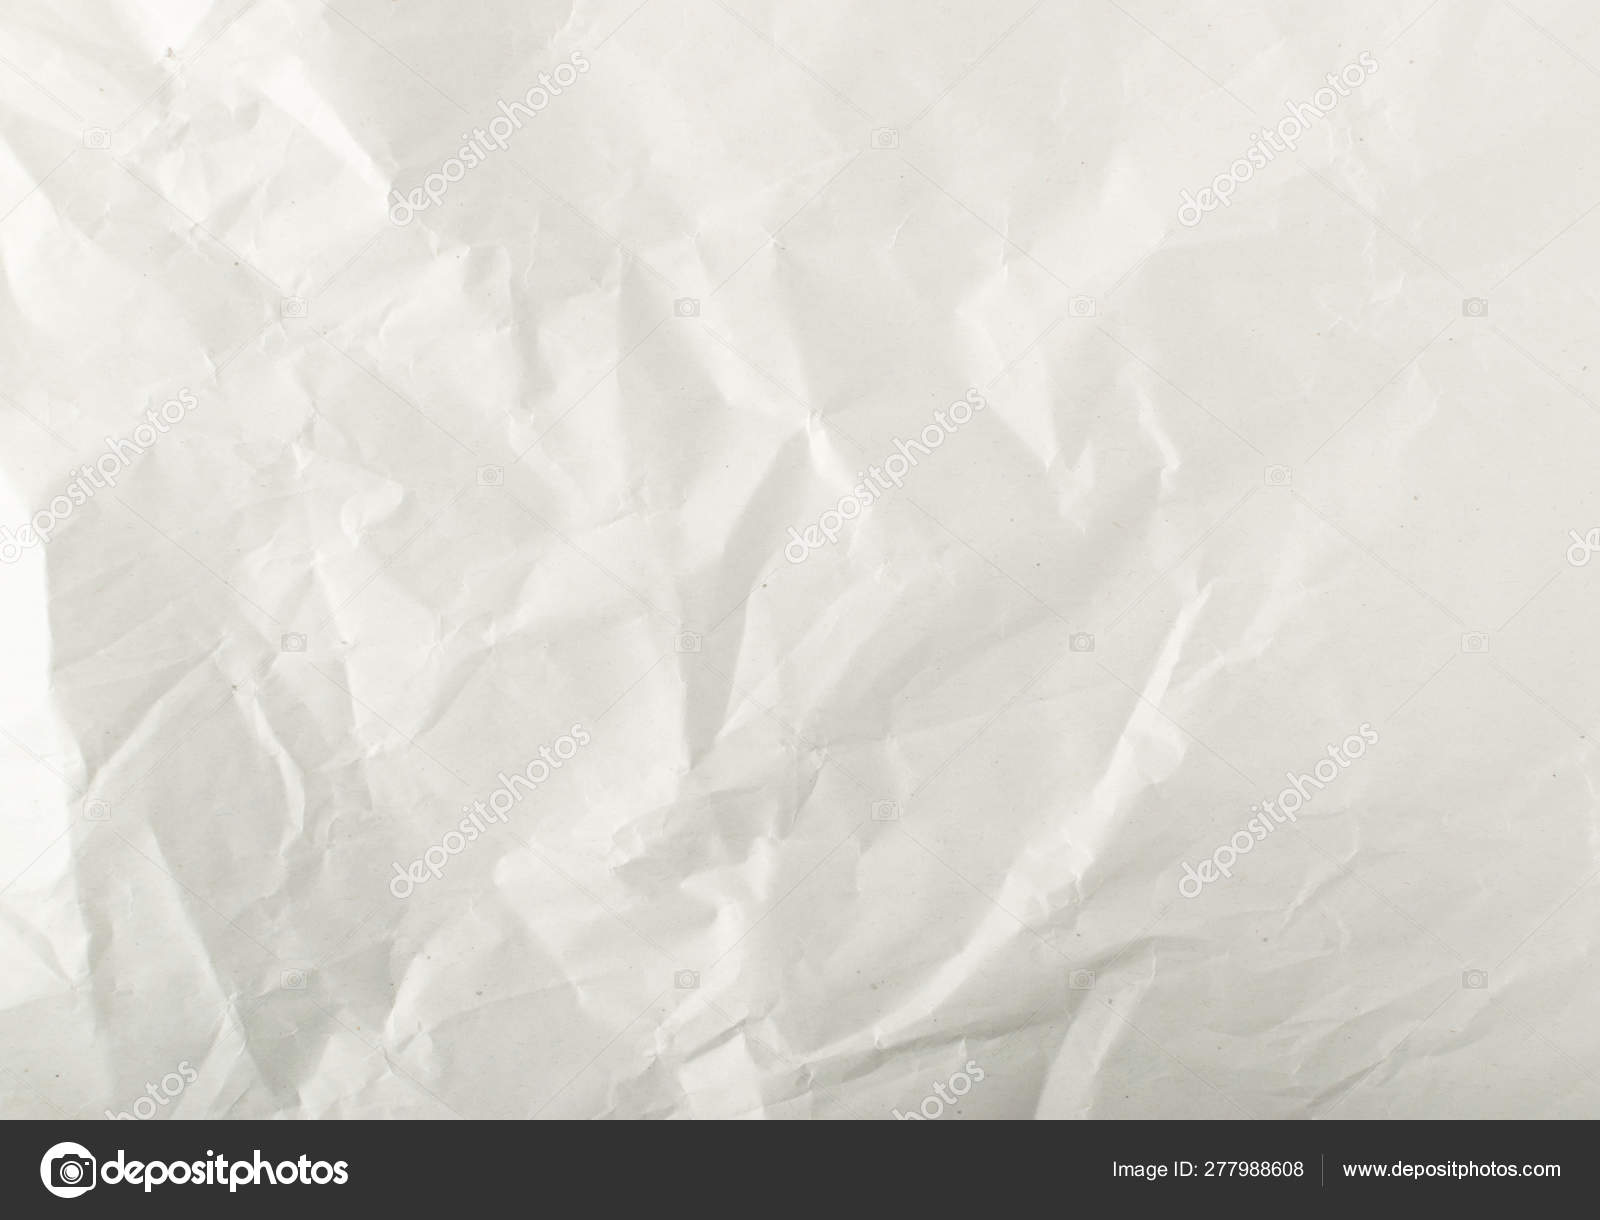 Sheet Of White Thin Crumpled Craft Paper Background Top View. Wrinkled Grey  Wrapping Paper Texture Or Pattern Stock Photo, Picture and Royalty Free  Image. Image 119969111.